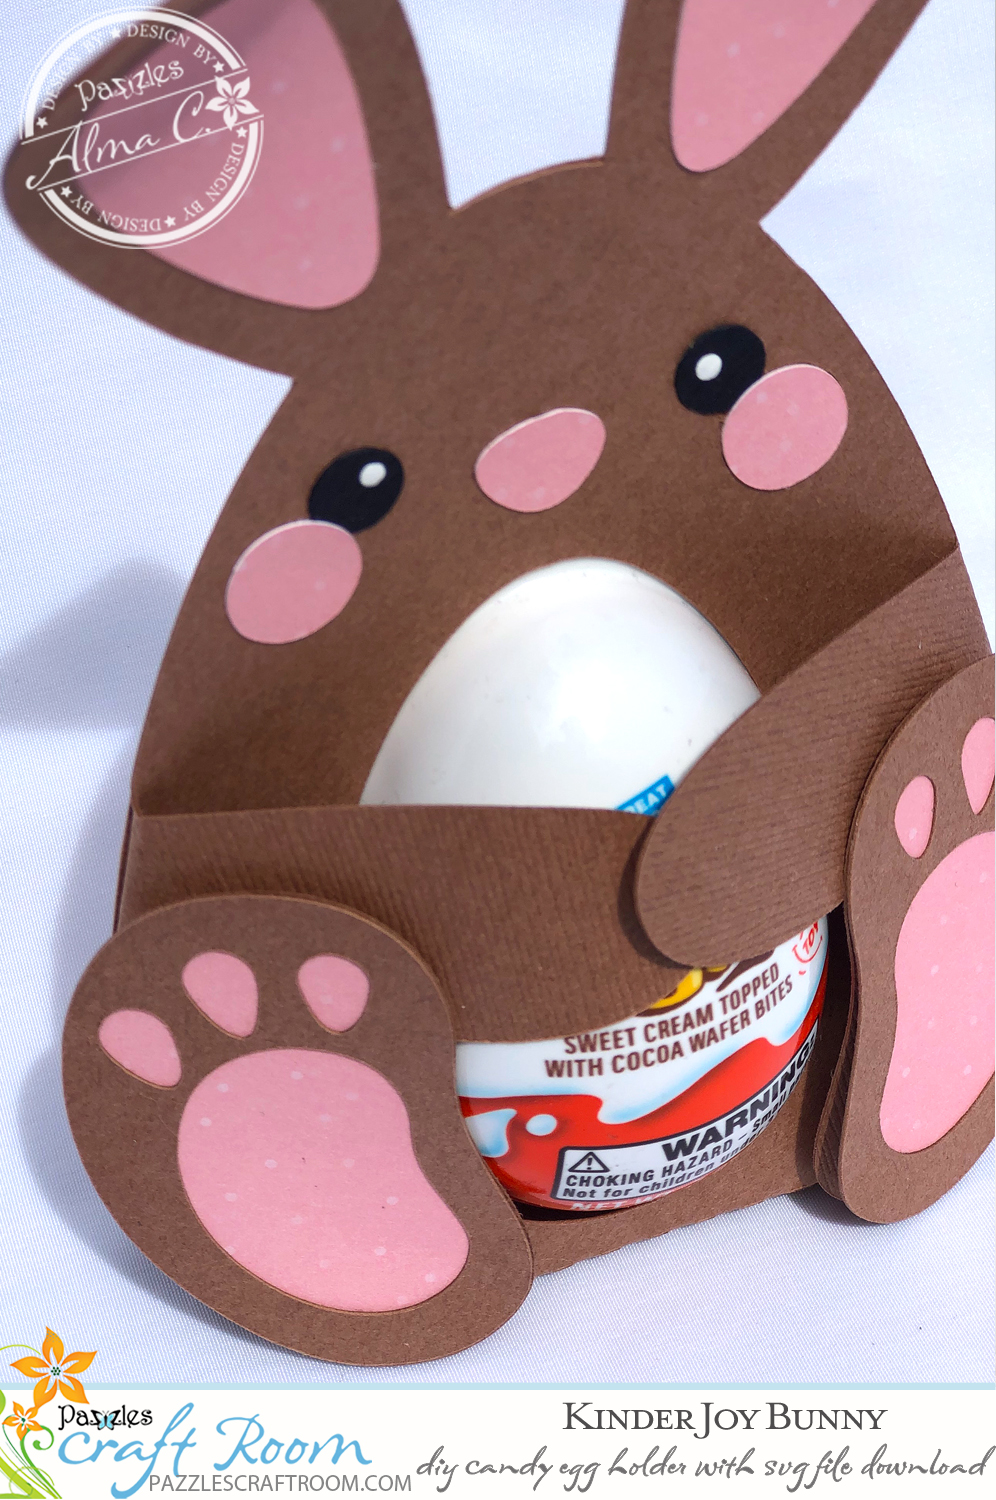 Pazzles DIY Bunny Candy Egg Holder for Kinder Joy with instant SVG download. Compatible with all major electronic cutters including Pazzles Inspiration, Cricut, and Silhouette Cameo. Design by Alma Cervantes.